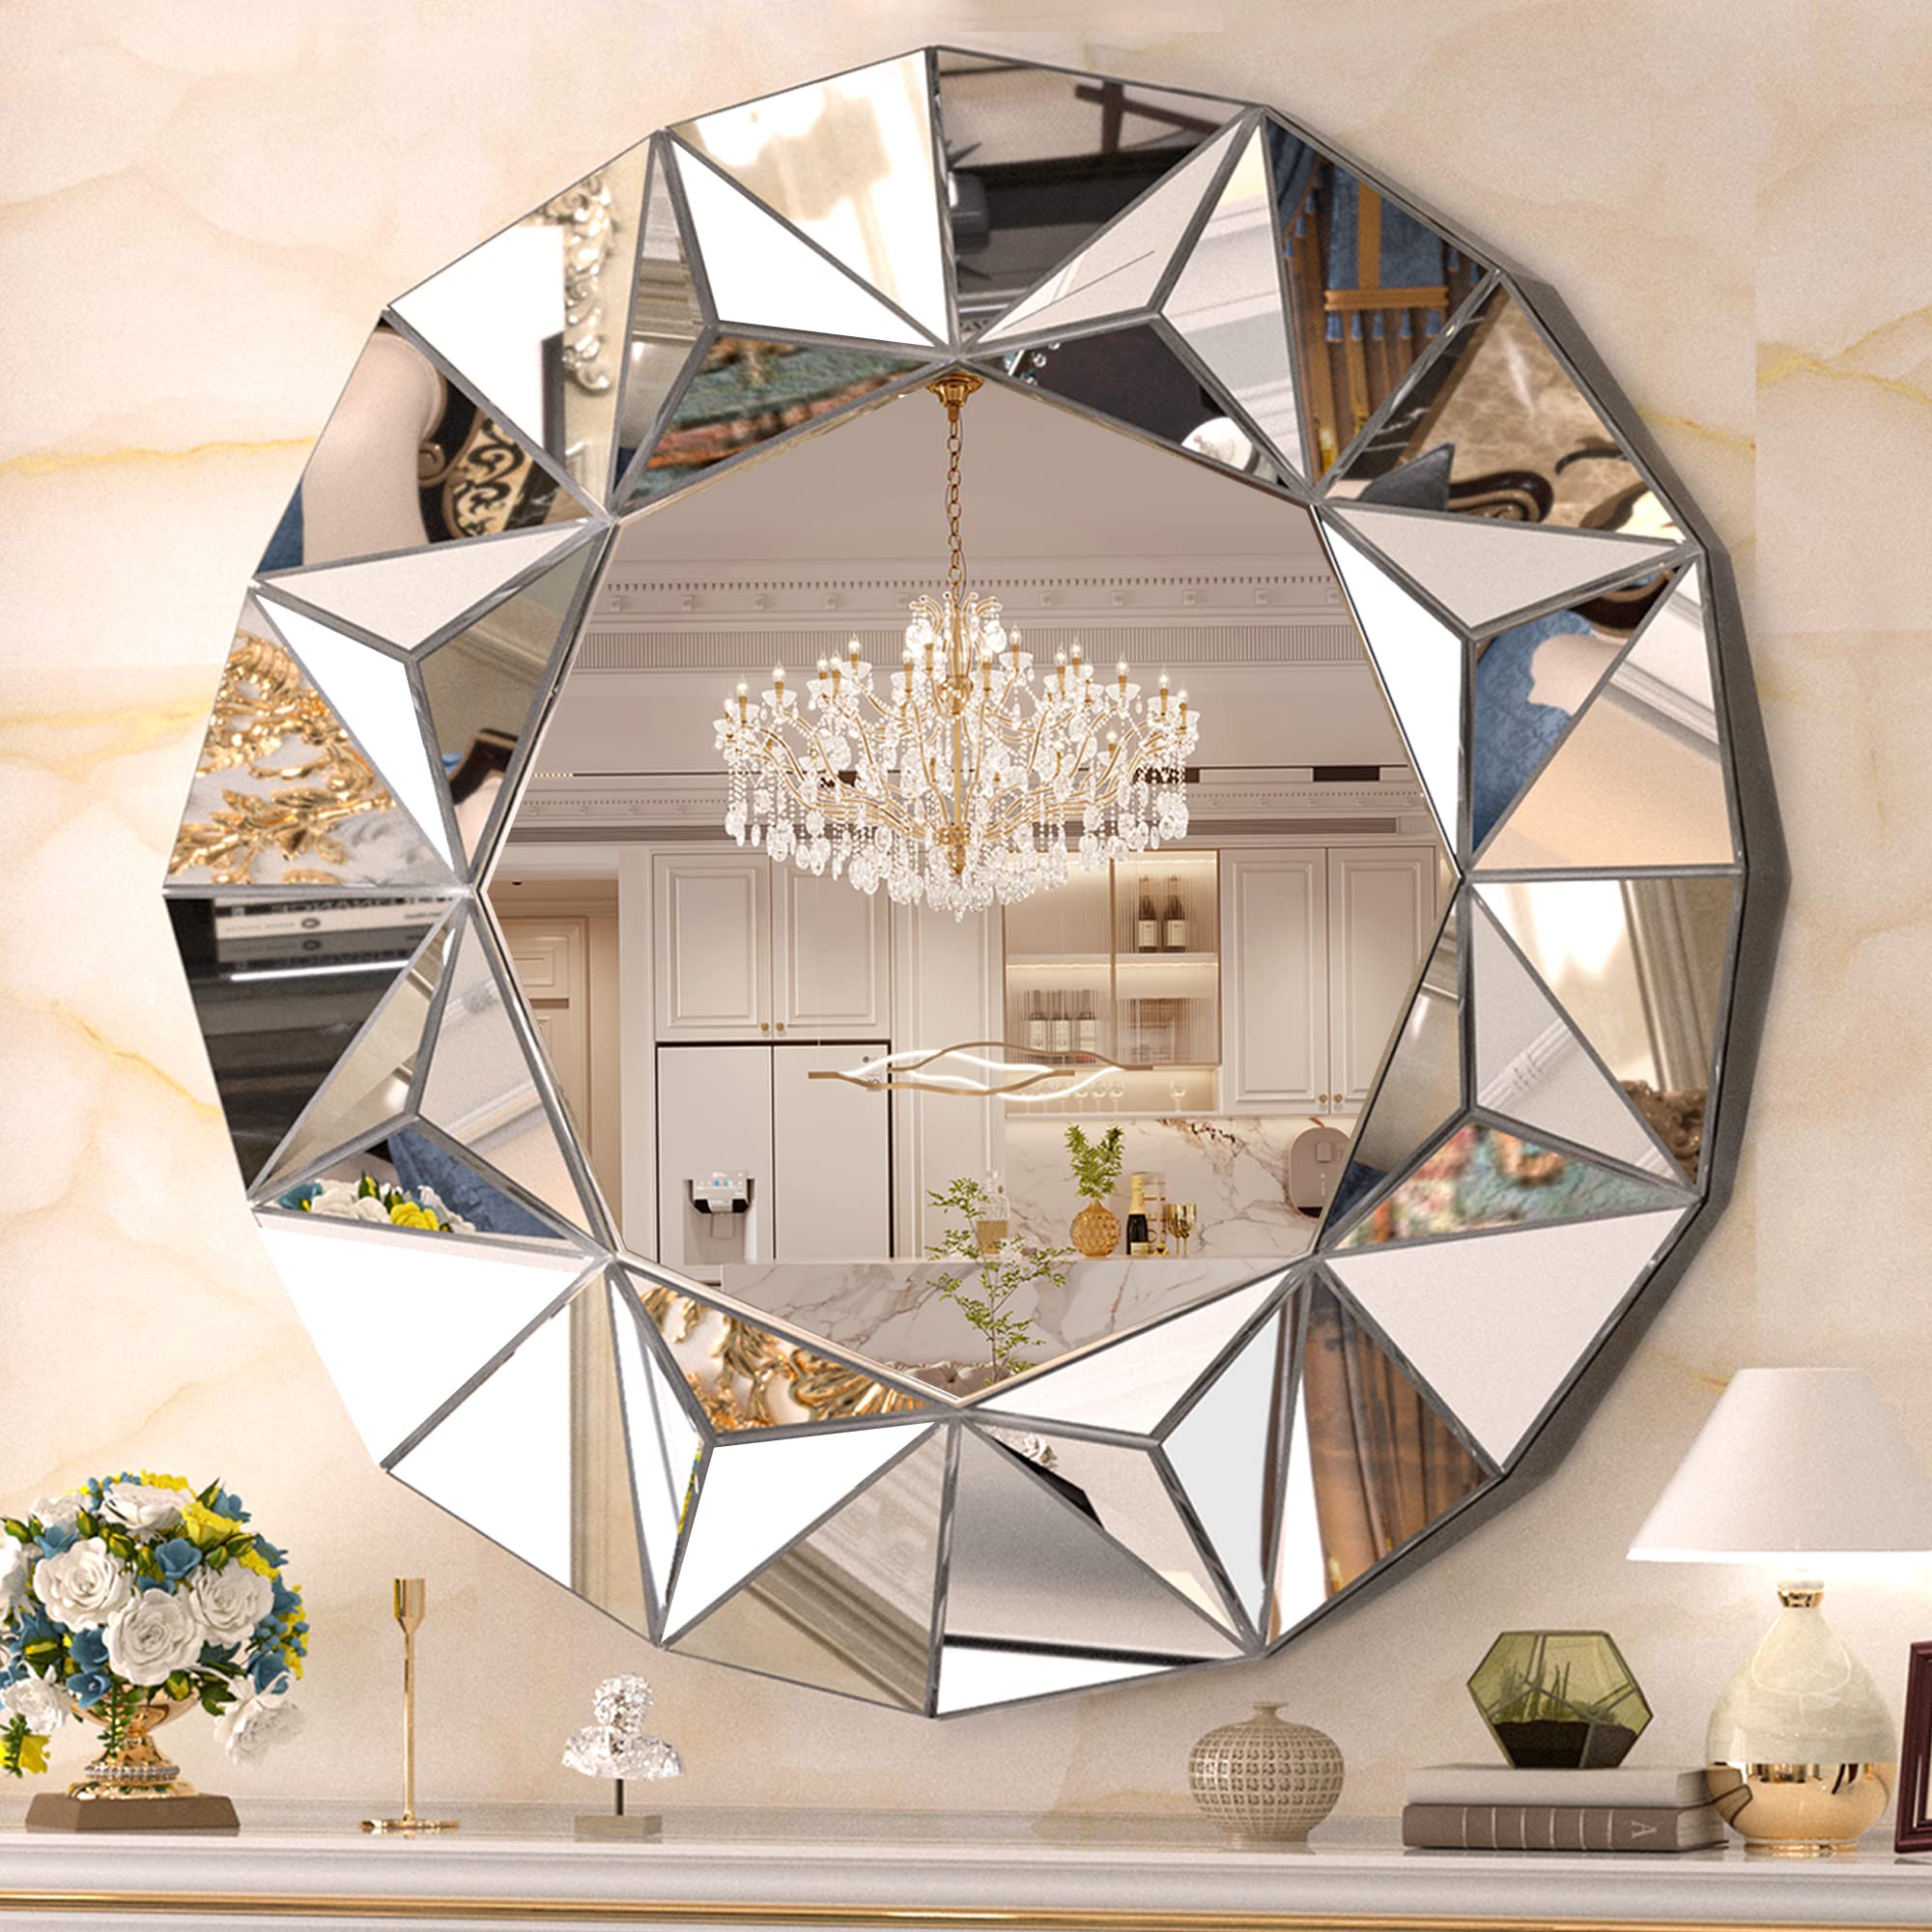 What decorative mirrors suits us the best?